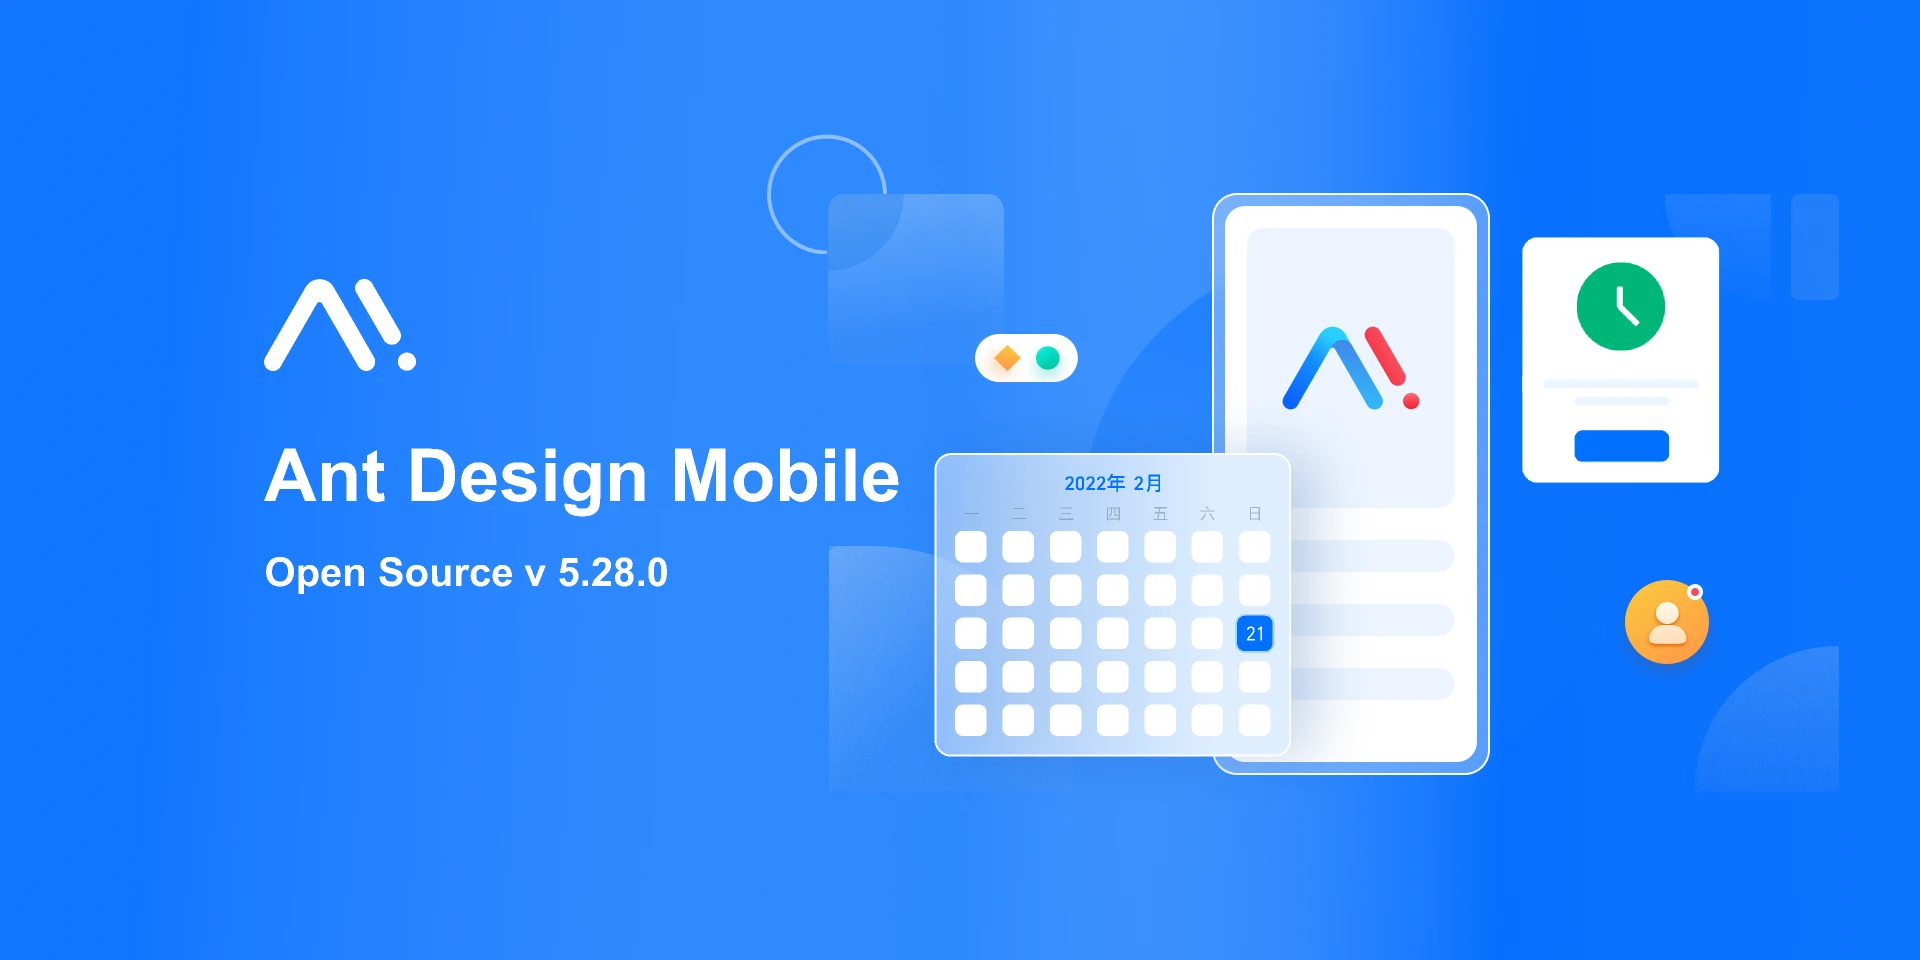 Ant Design Mobile for Figma and Adobe XD